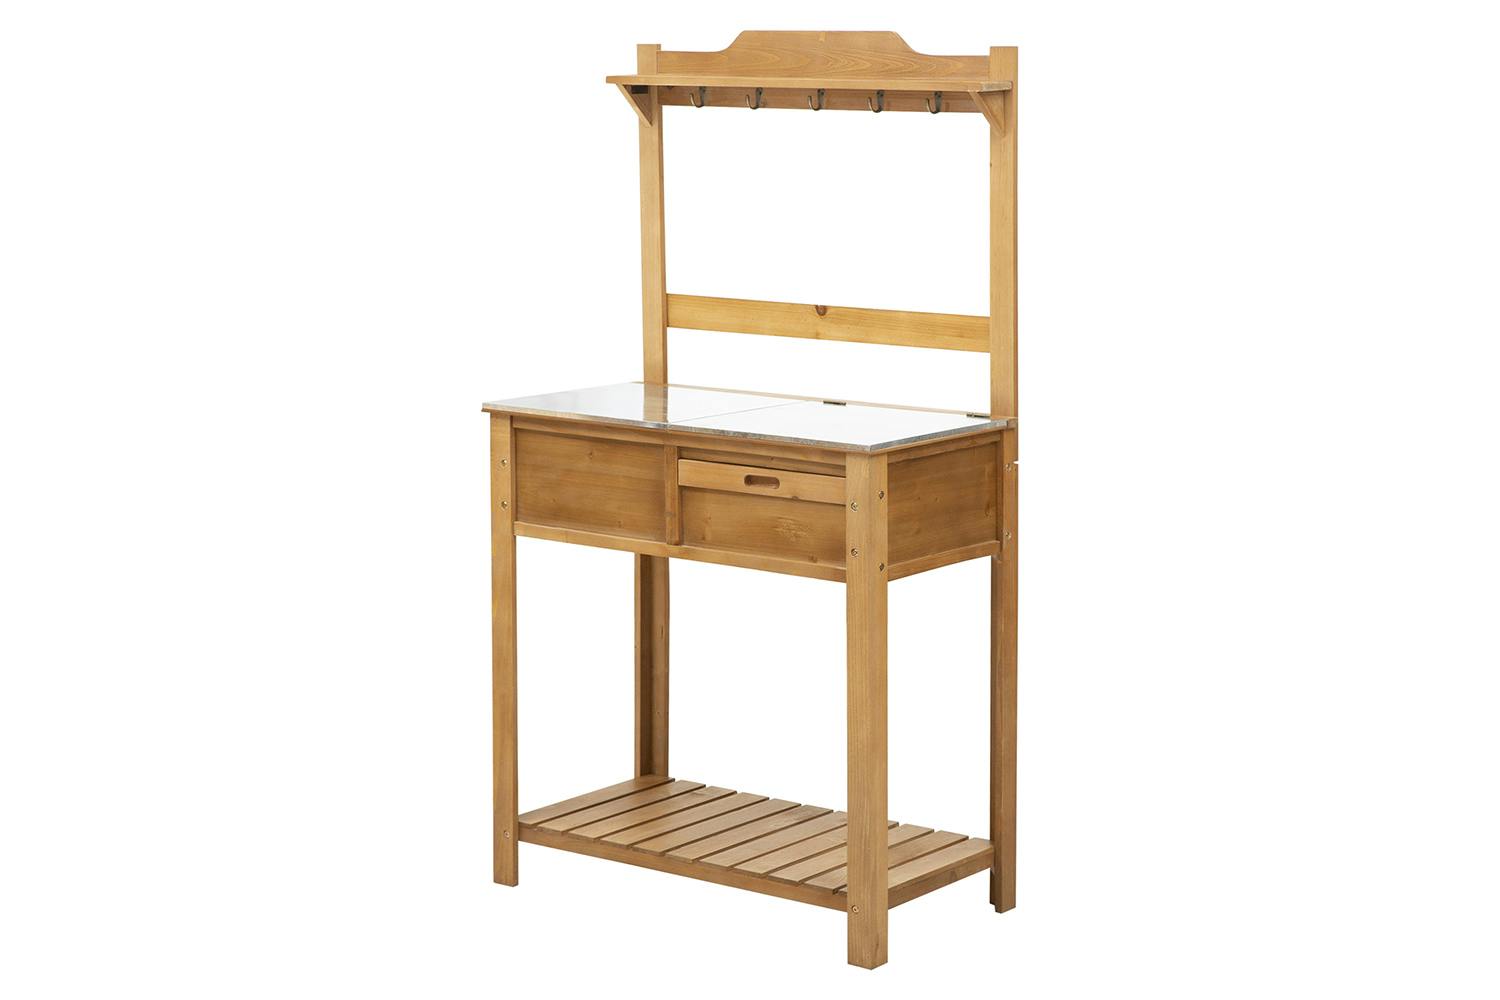 Outsunny Fir Wood Garden Potting Table | Natural